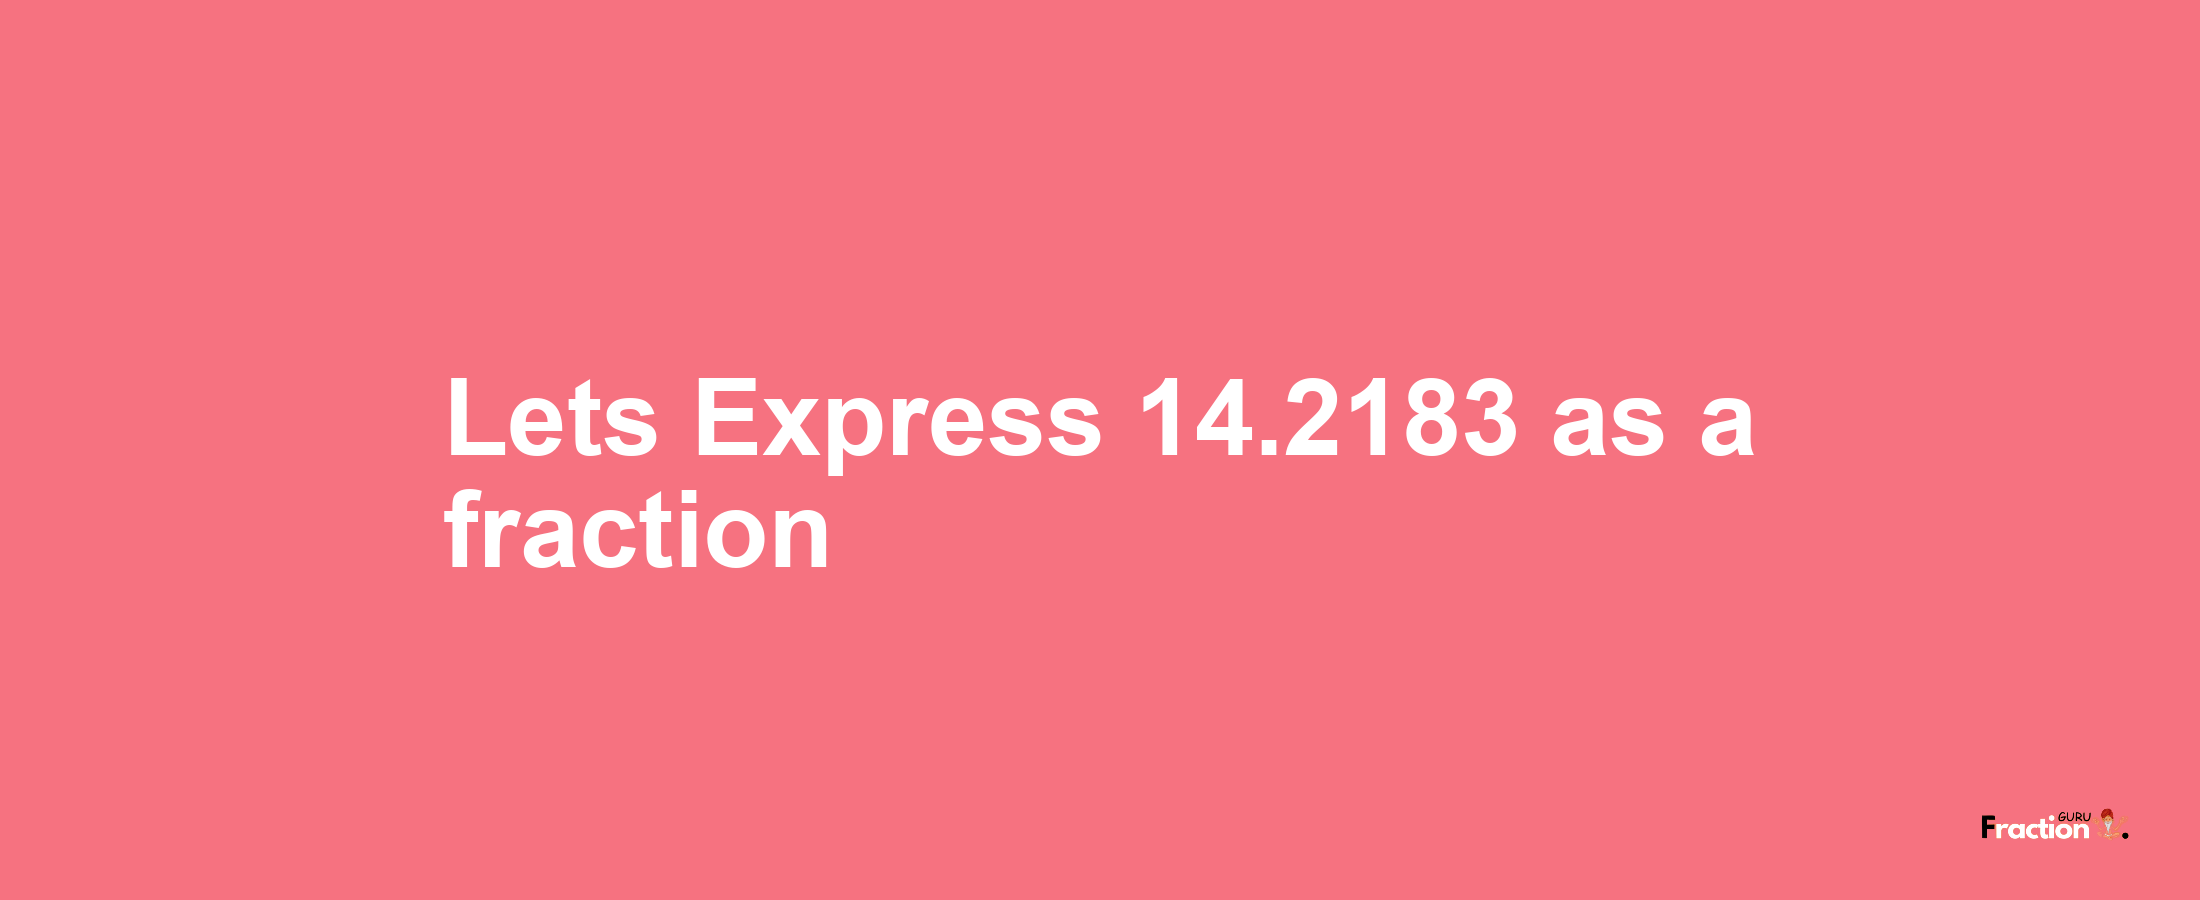 Lets Express 14.2183 as afraction